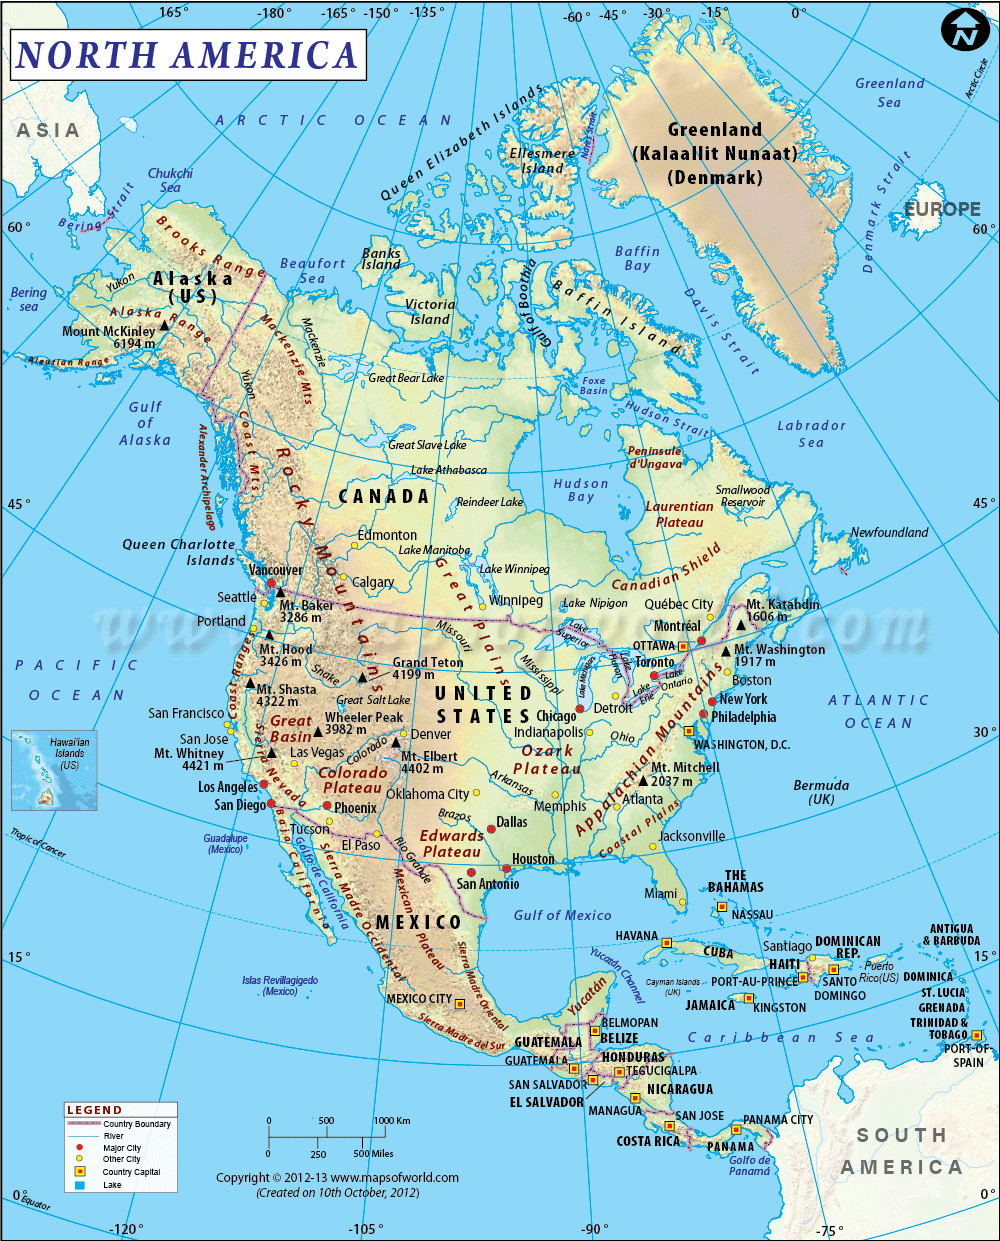 Printable Map North America Best Of One Of The Best Maps North America Shows Physical Landform Regions